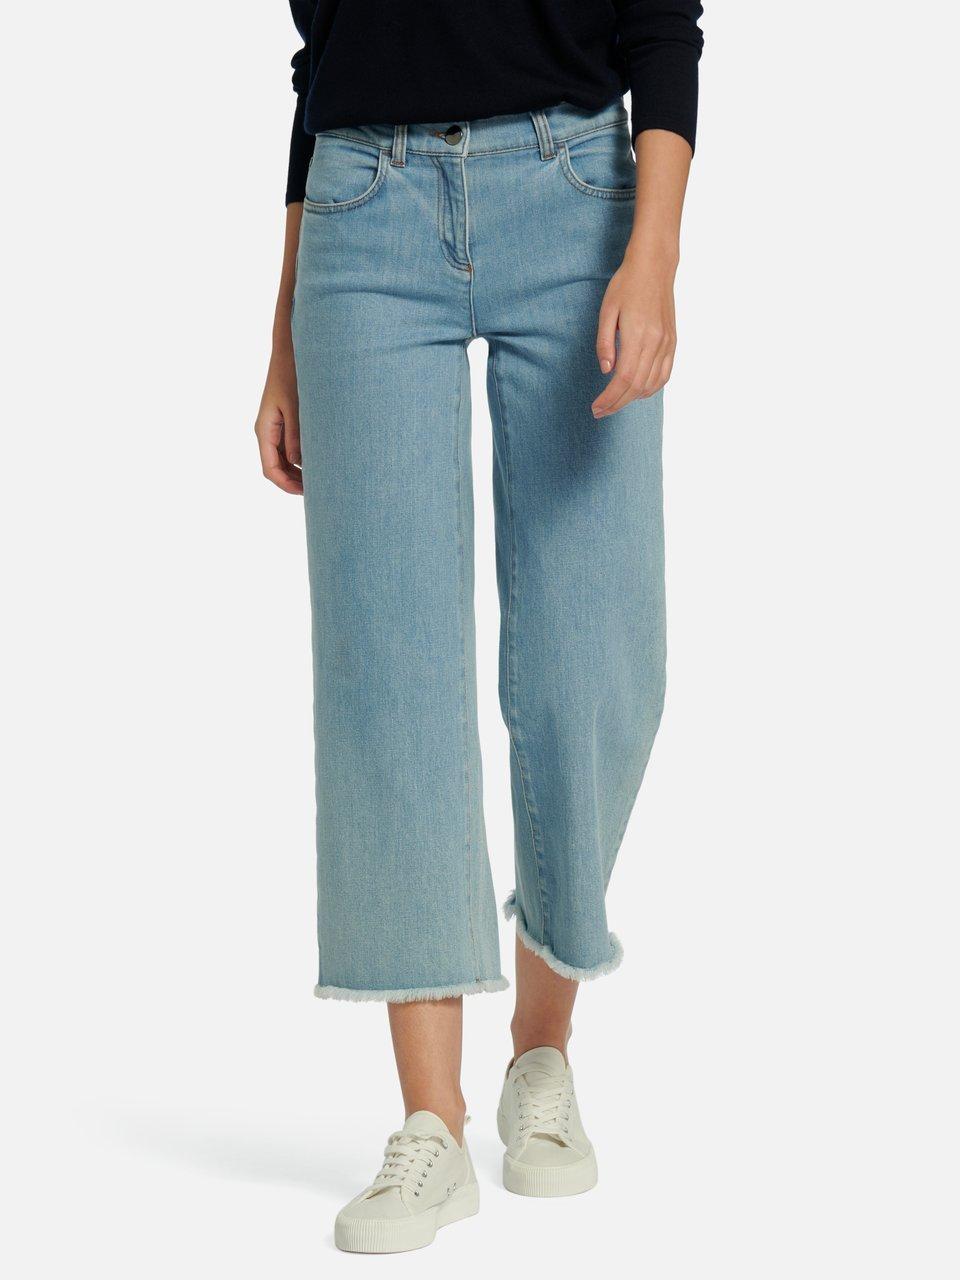 PETER HAHN PURE EDITION - Denim culottes in 4-pocket style - bleached denim